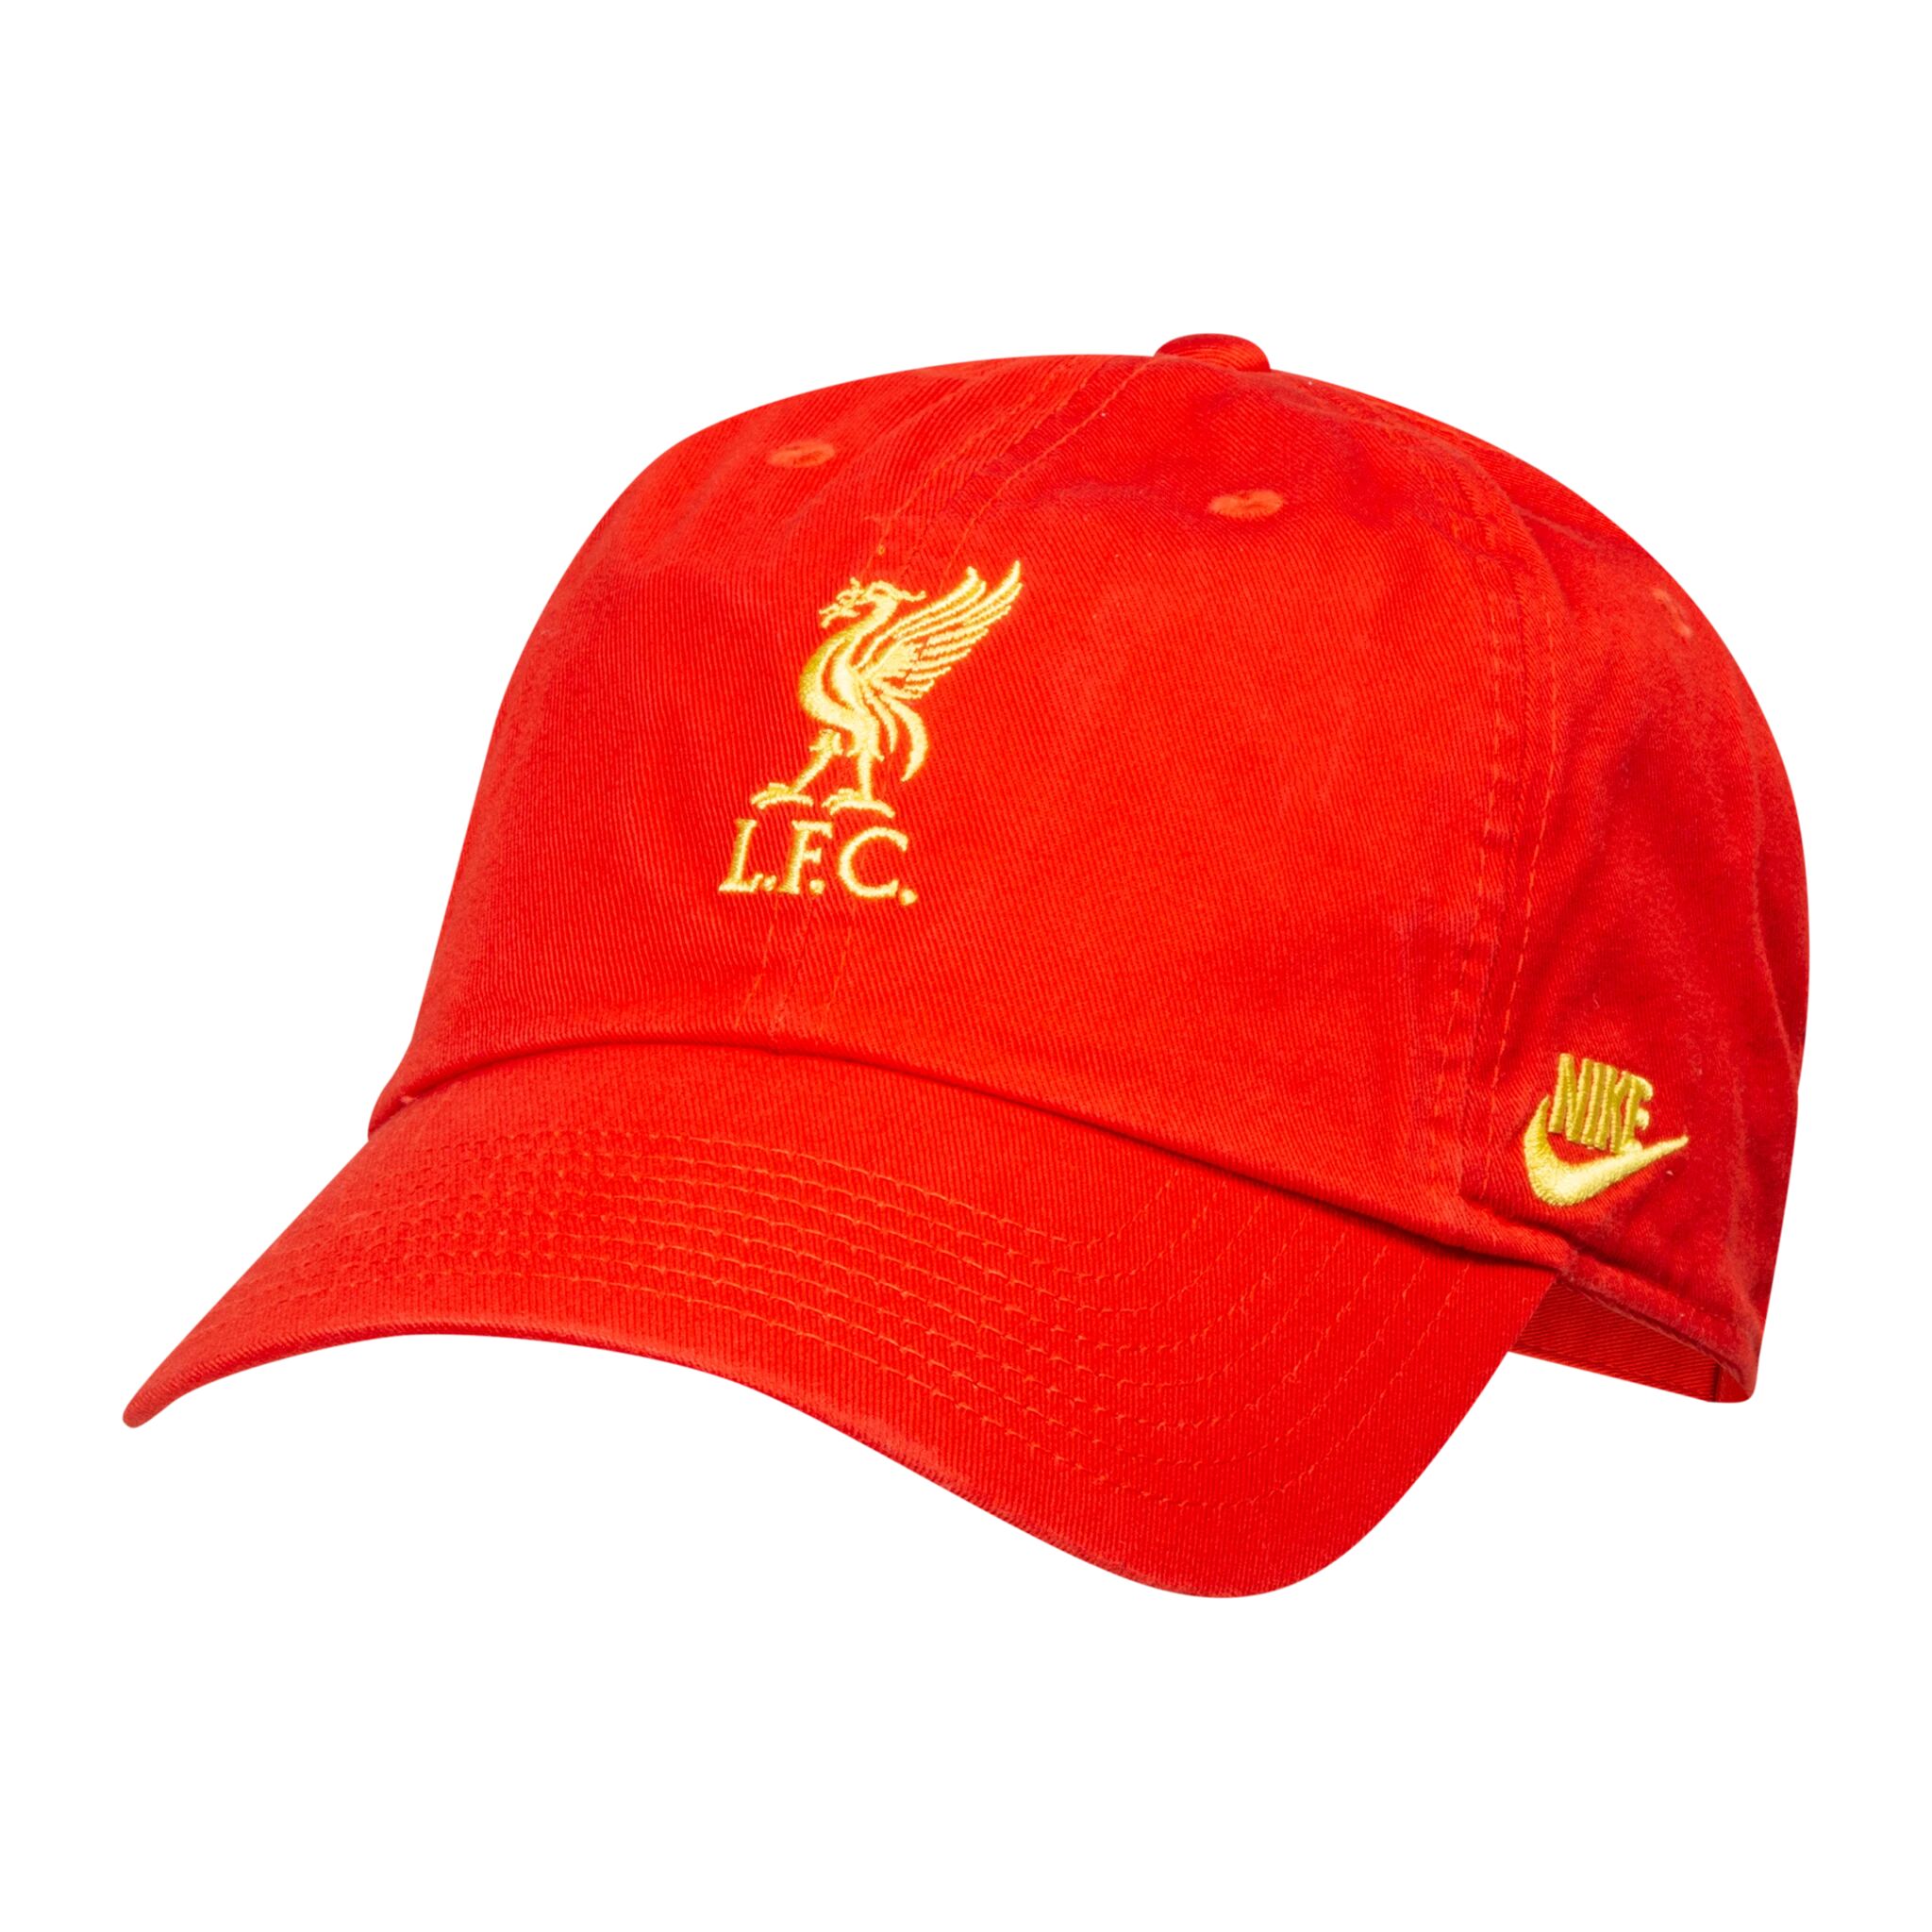 Nike LIVERPOOL FC U NK H86 CAP CL, caps unisex One Size Rush Red/chrome Yell